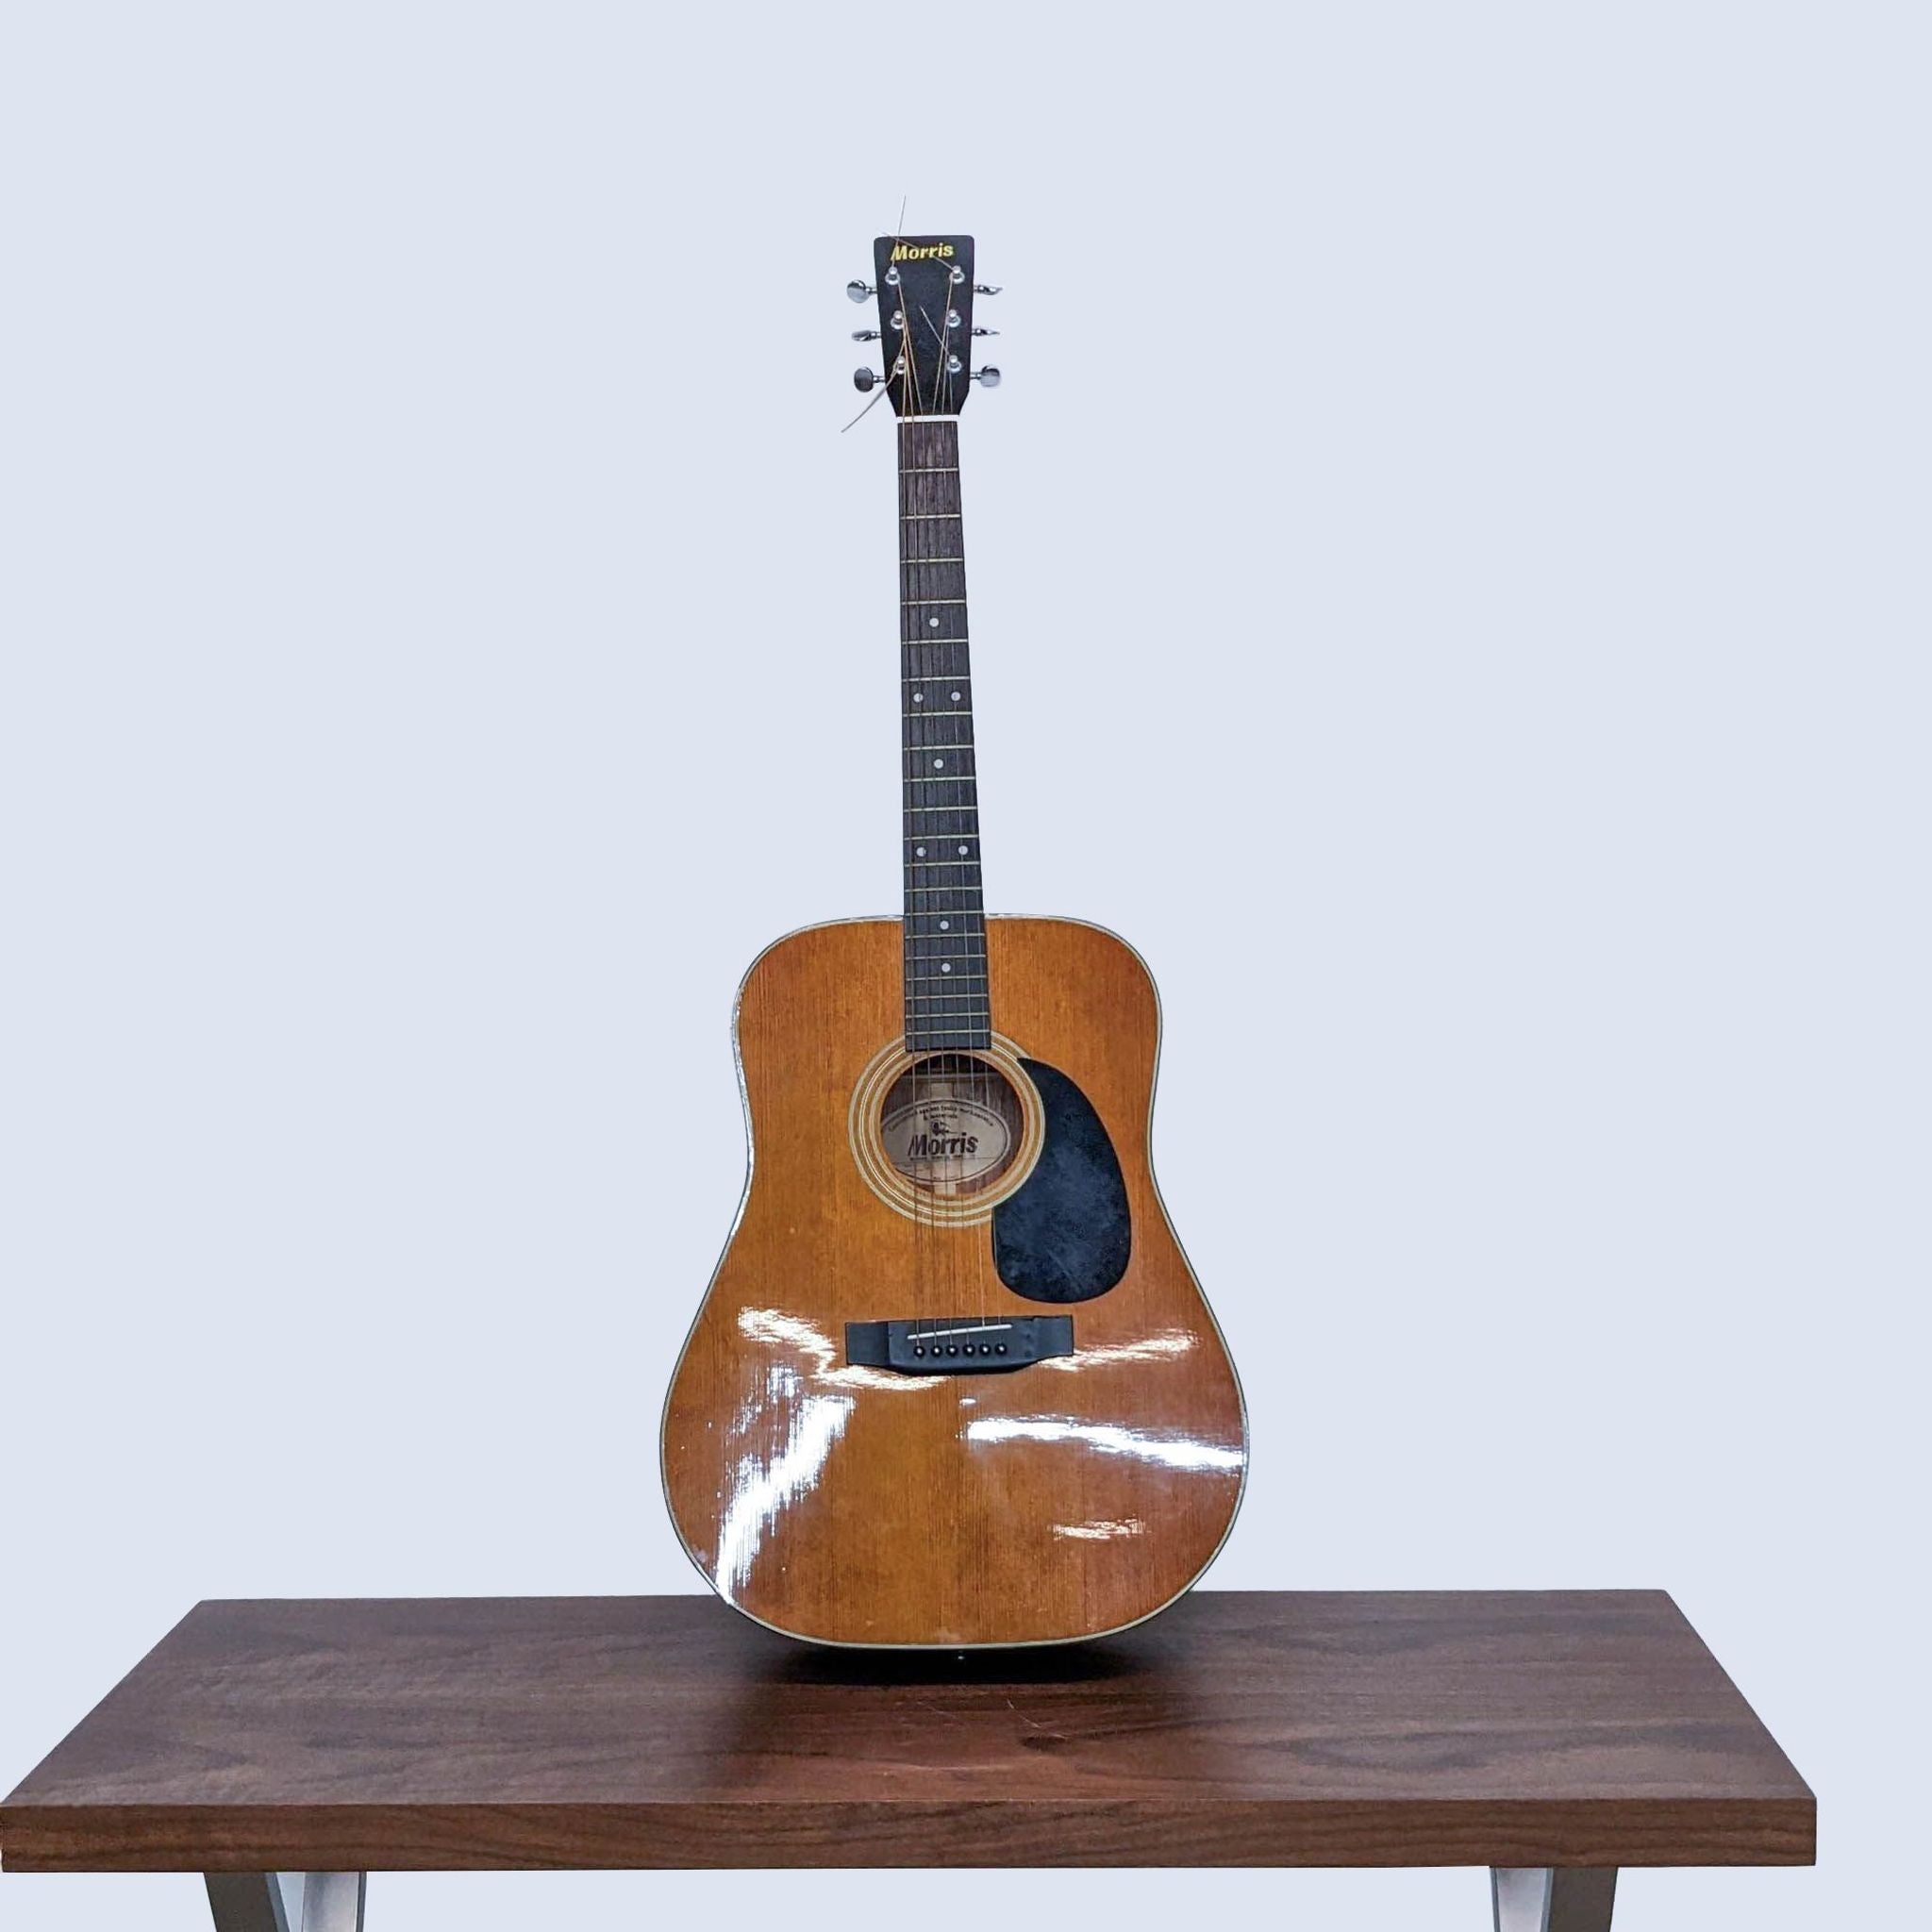 Closed guitar case standing on wooden table, grey background, exemplifying protection for an instrument like the Morris MD-51M guitar.